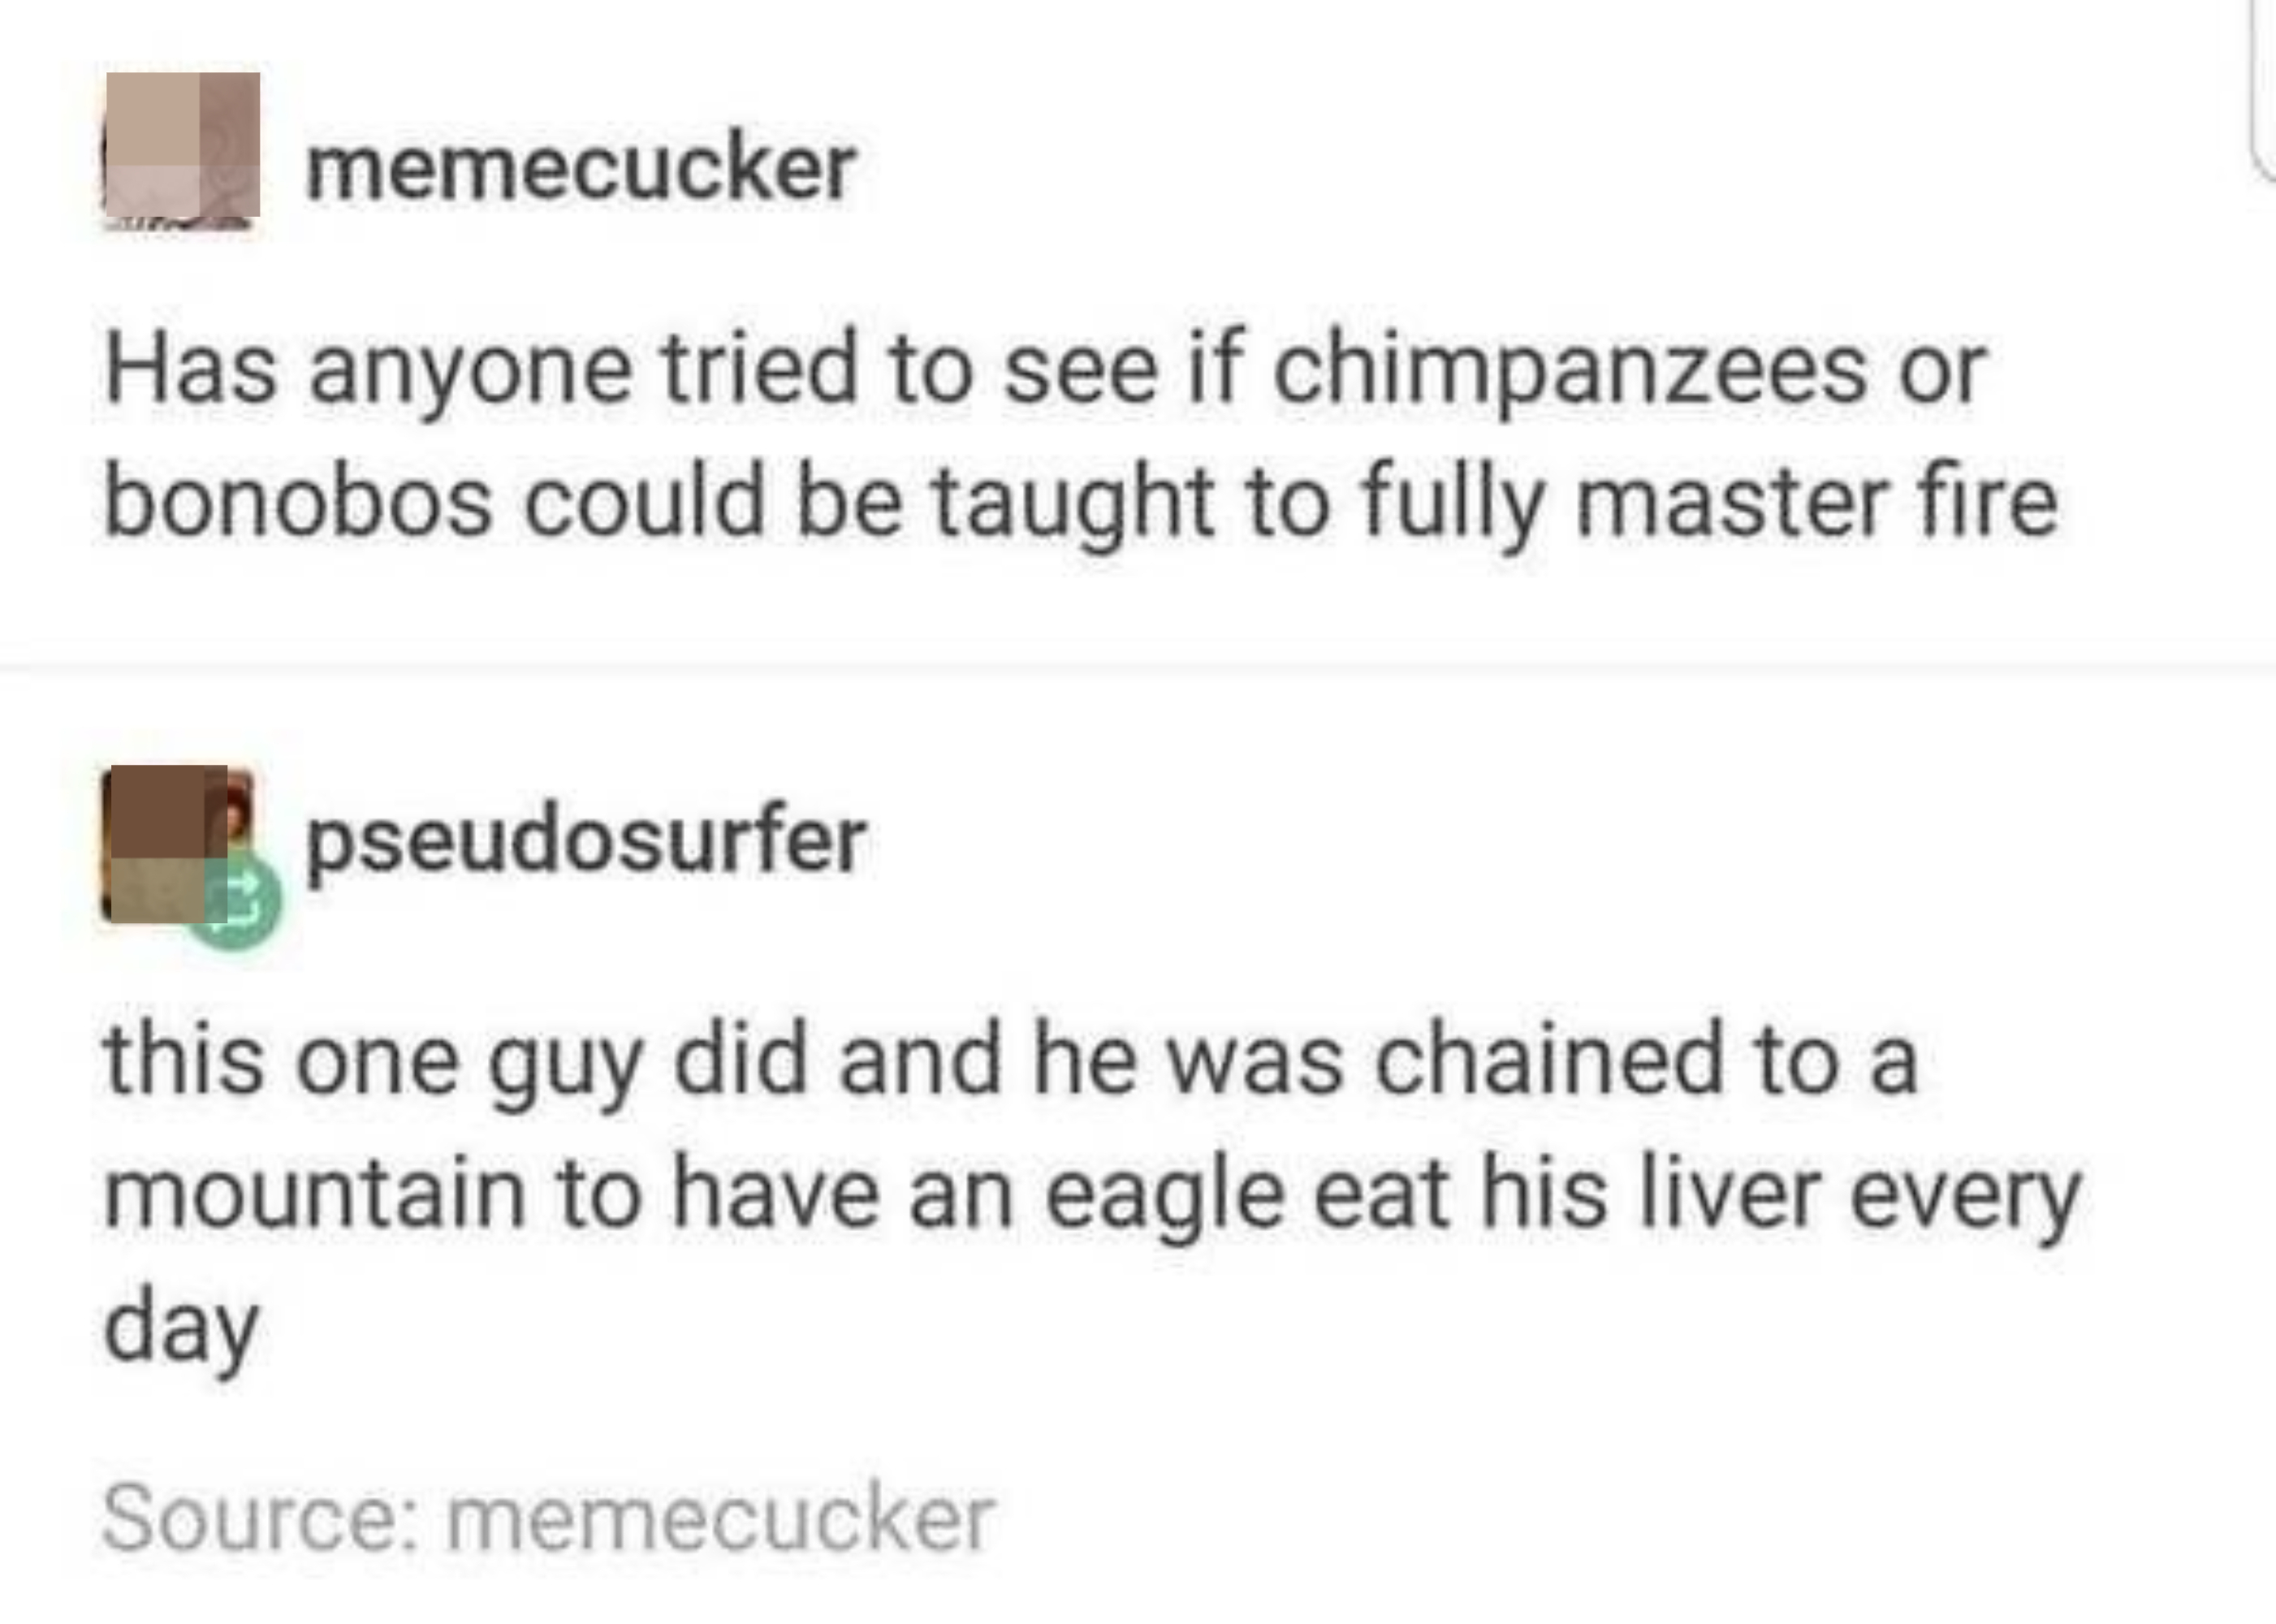 &quot;Has anyone tried to see if chimpanzees or bonobos could be taught to fully master fire?&quot; Response: &quot;this one guy did and he was chained to a mountain to have an eagle eat his liver every day&quot;